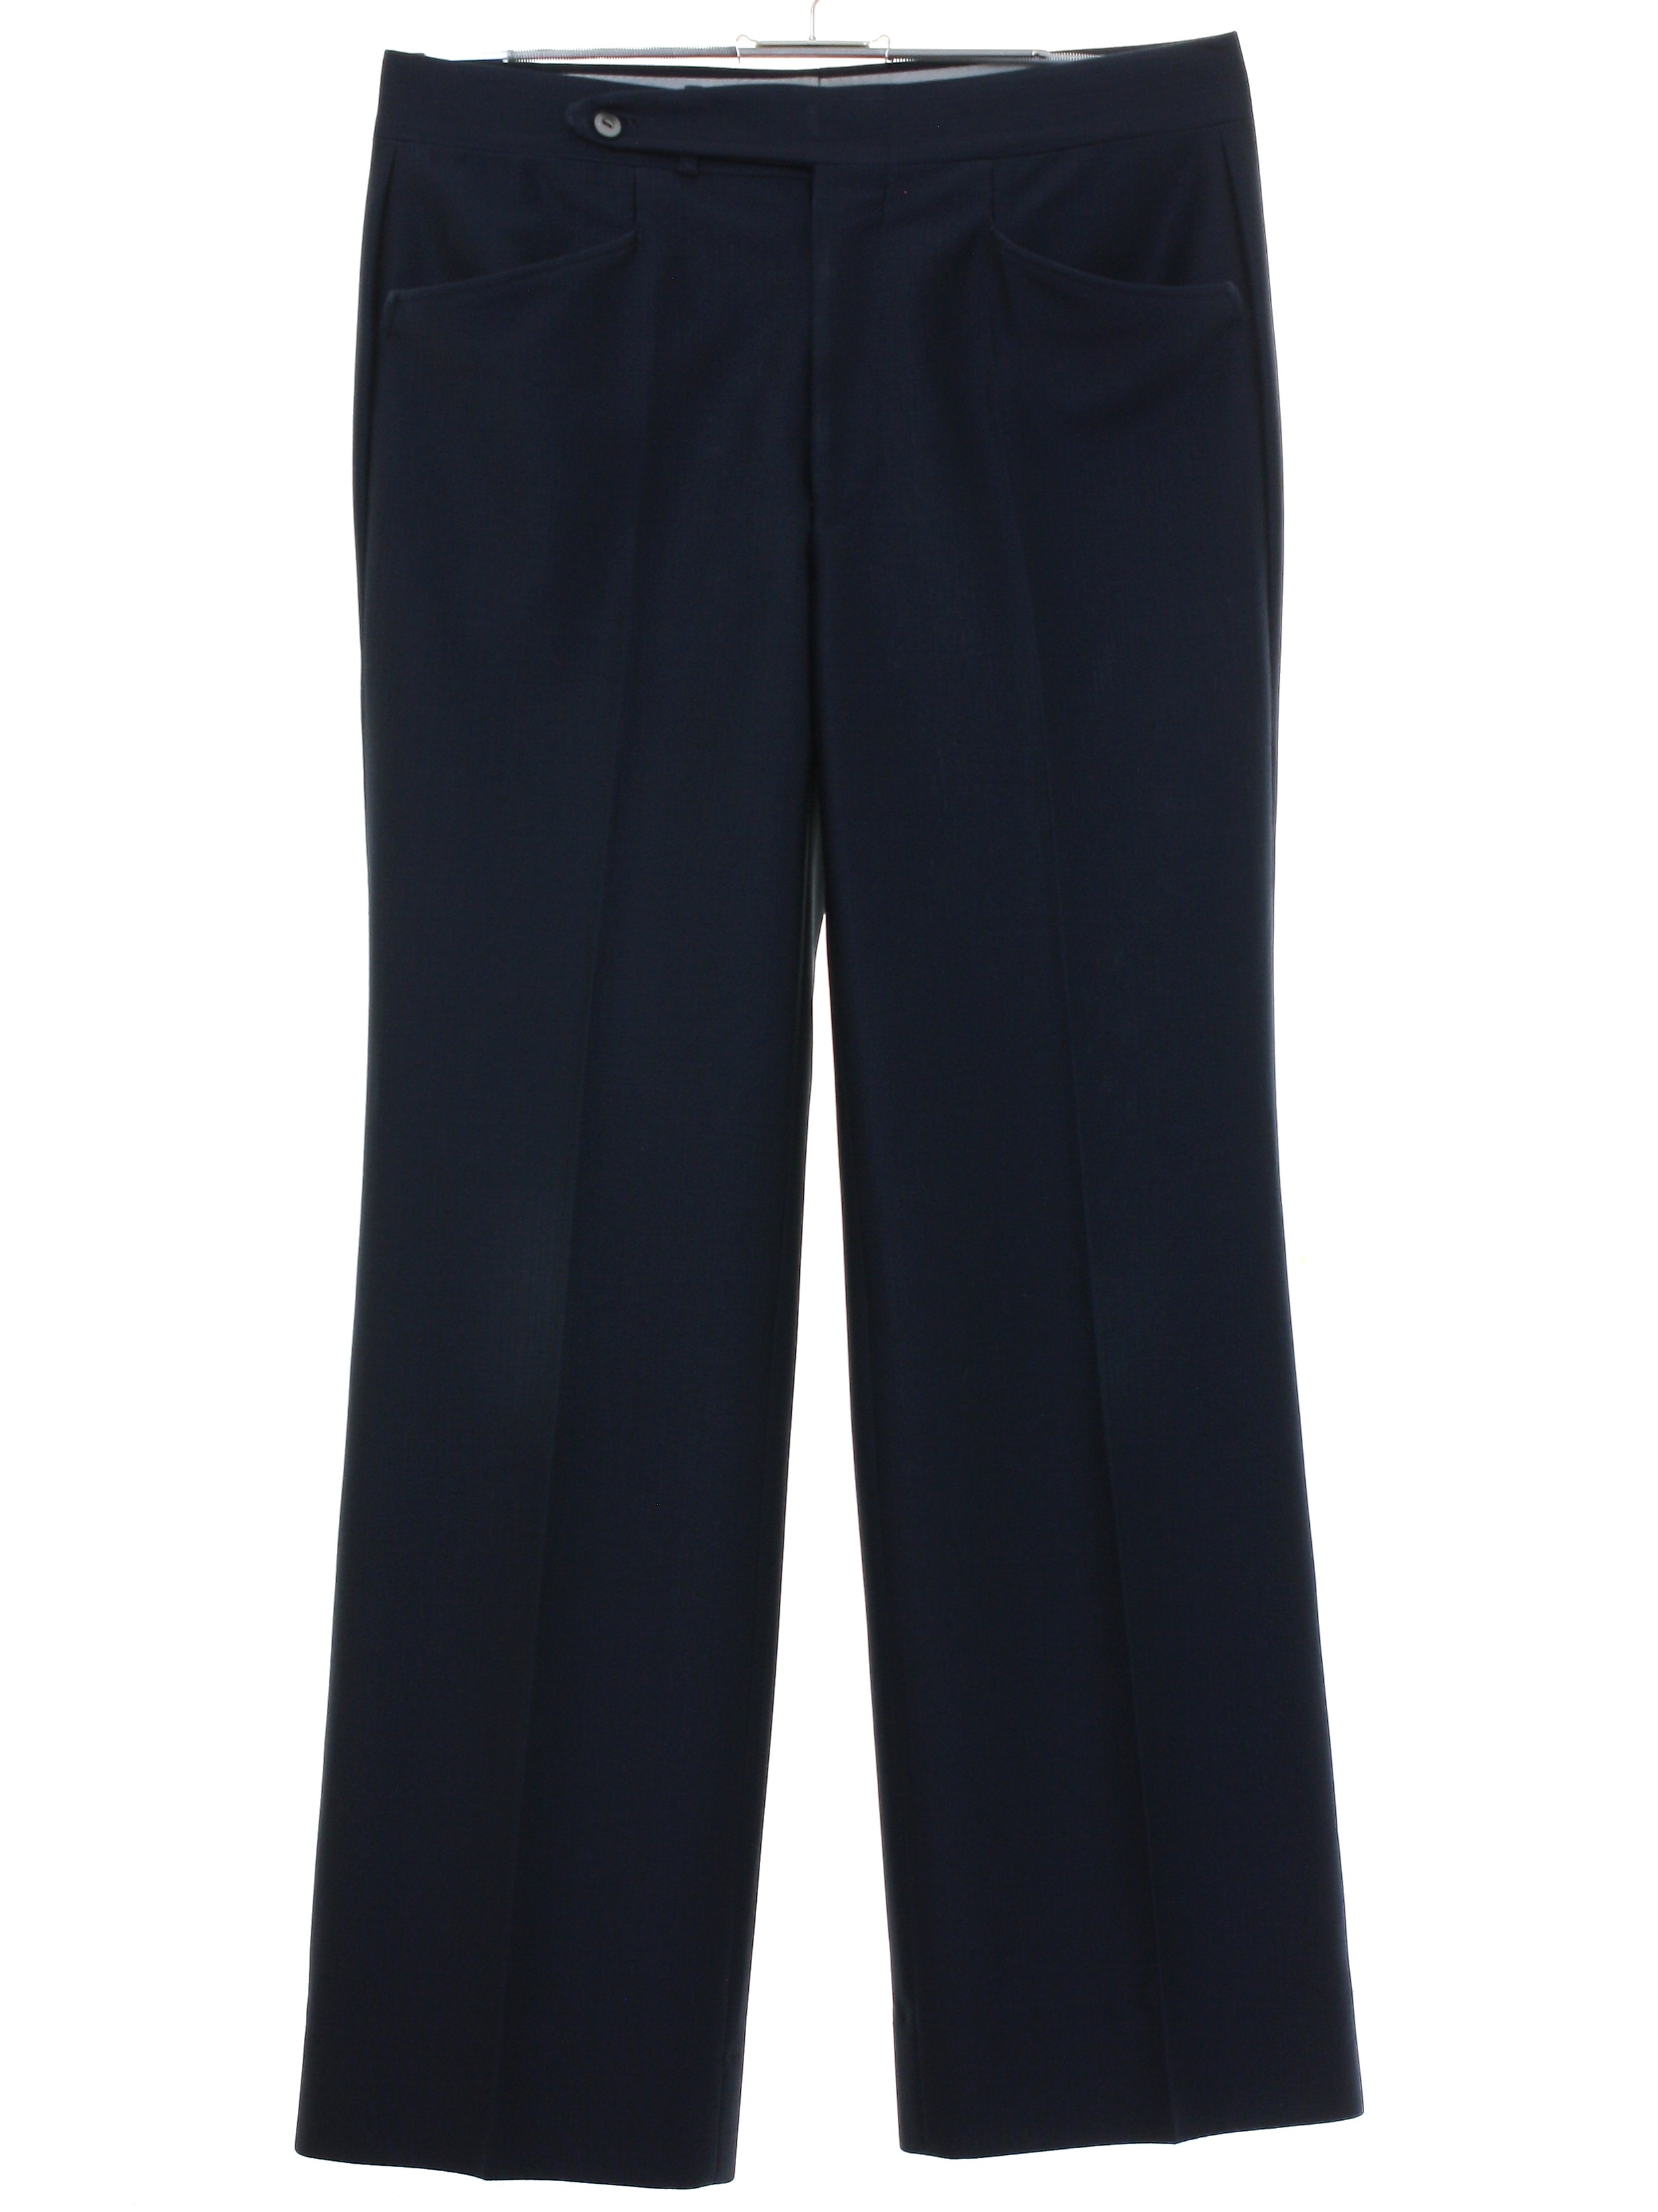 Vintage 70s Flared Pants / Flares: 70s -No Label- Mens midnight blue ...